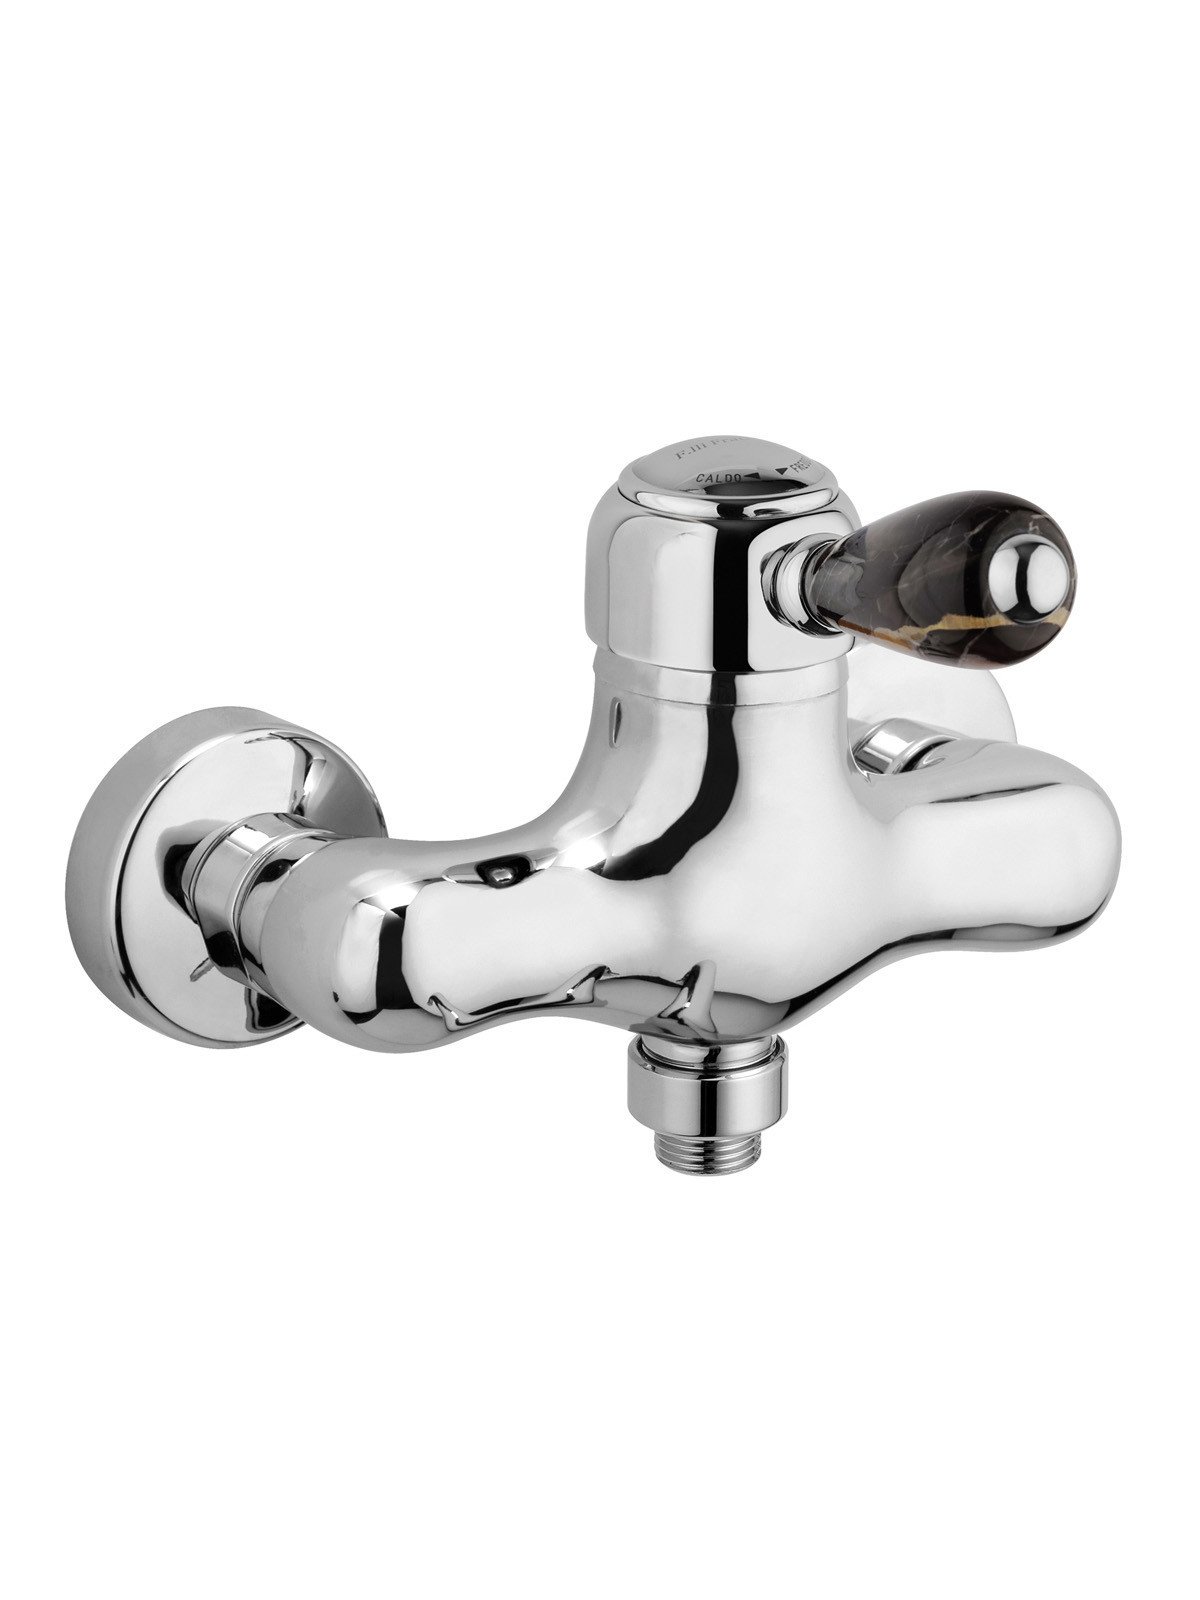 External single-lever shower mixer with lower connection